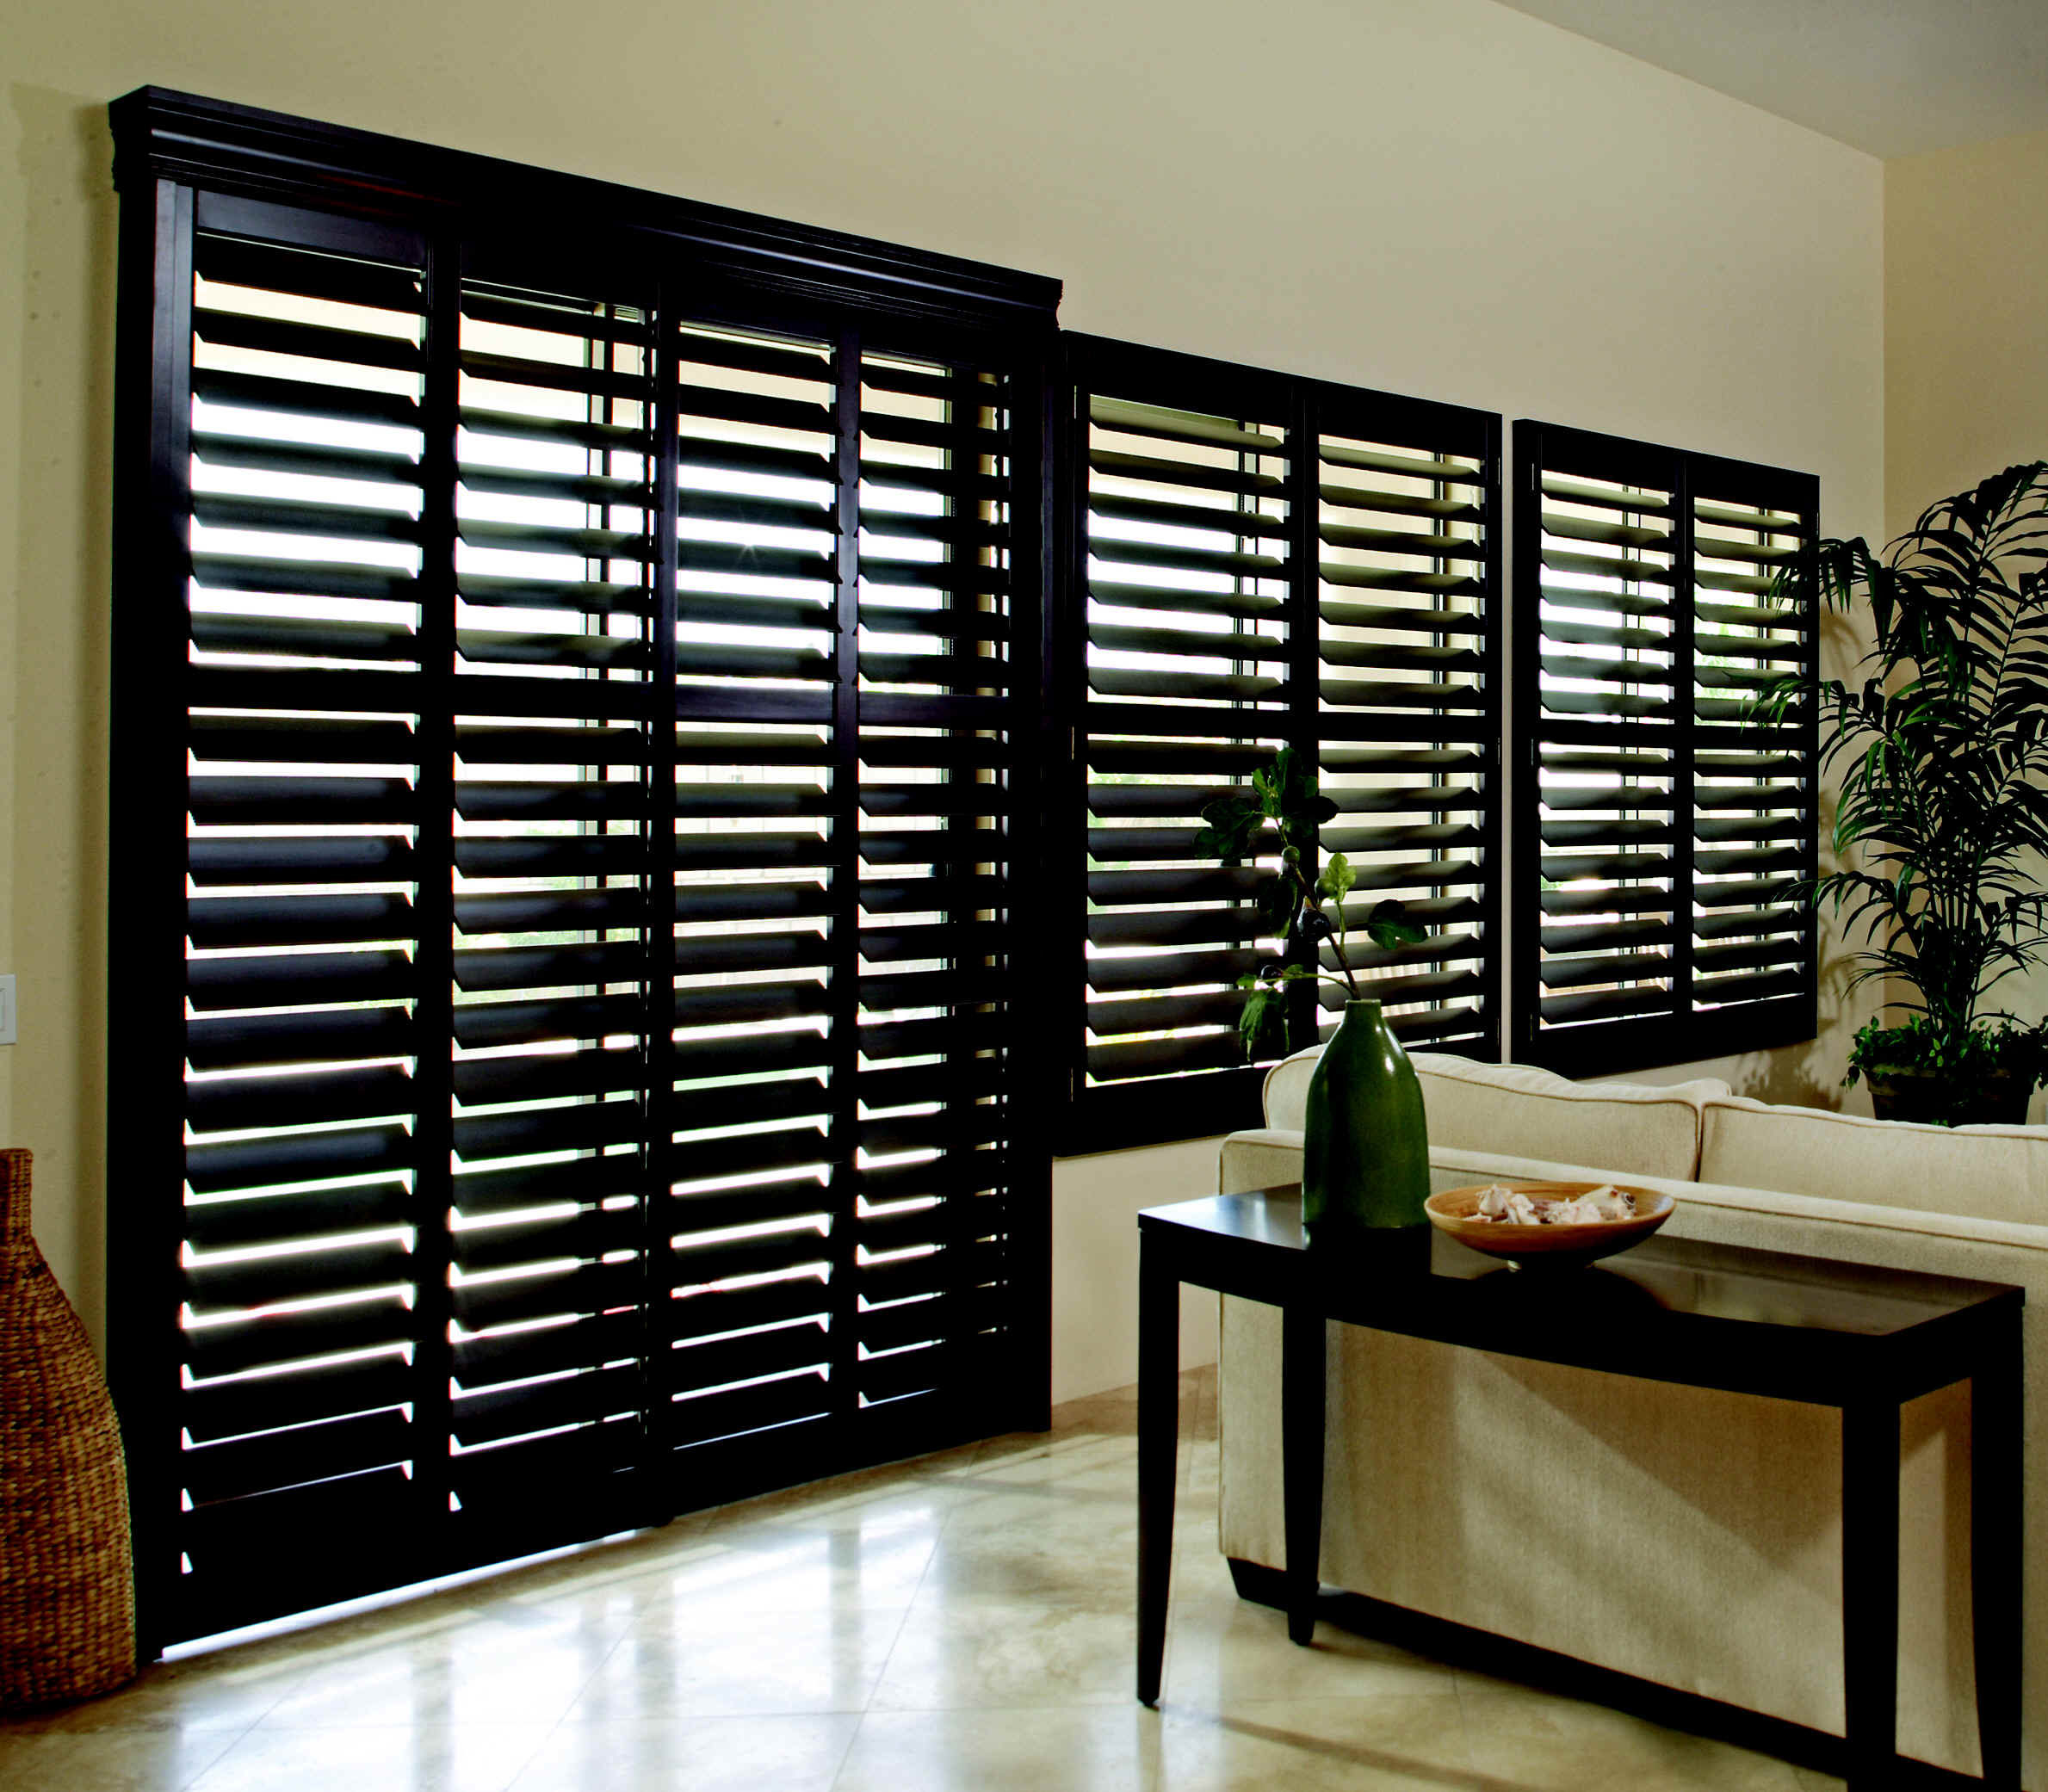 Clearview Shutters For Sale At Low Prices in Riverside